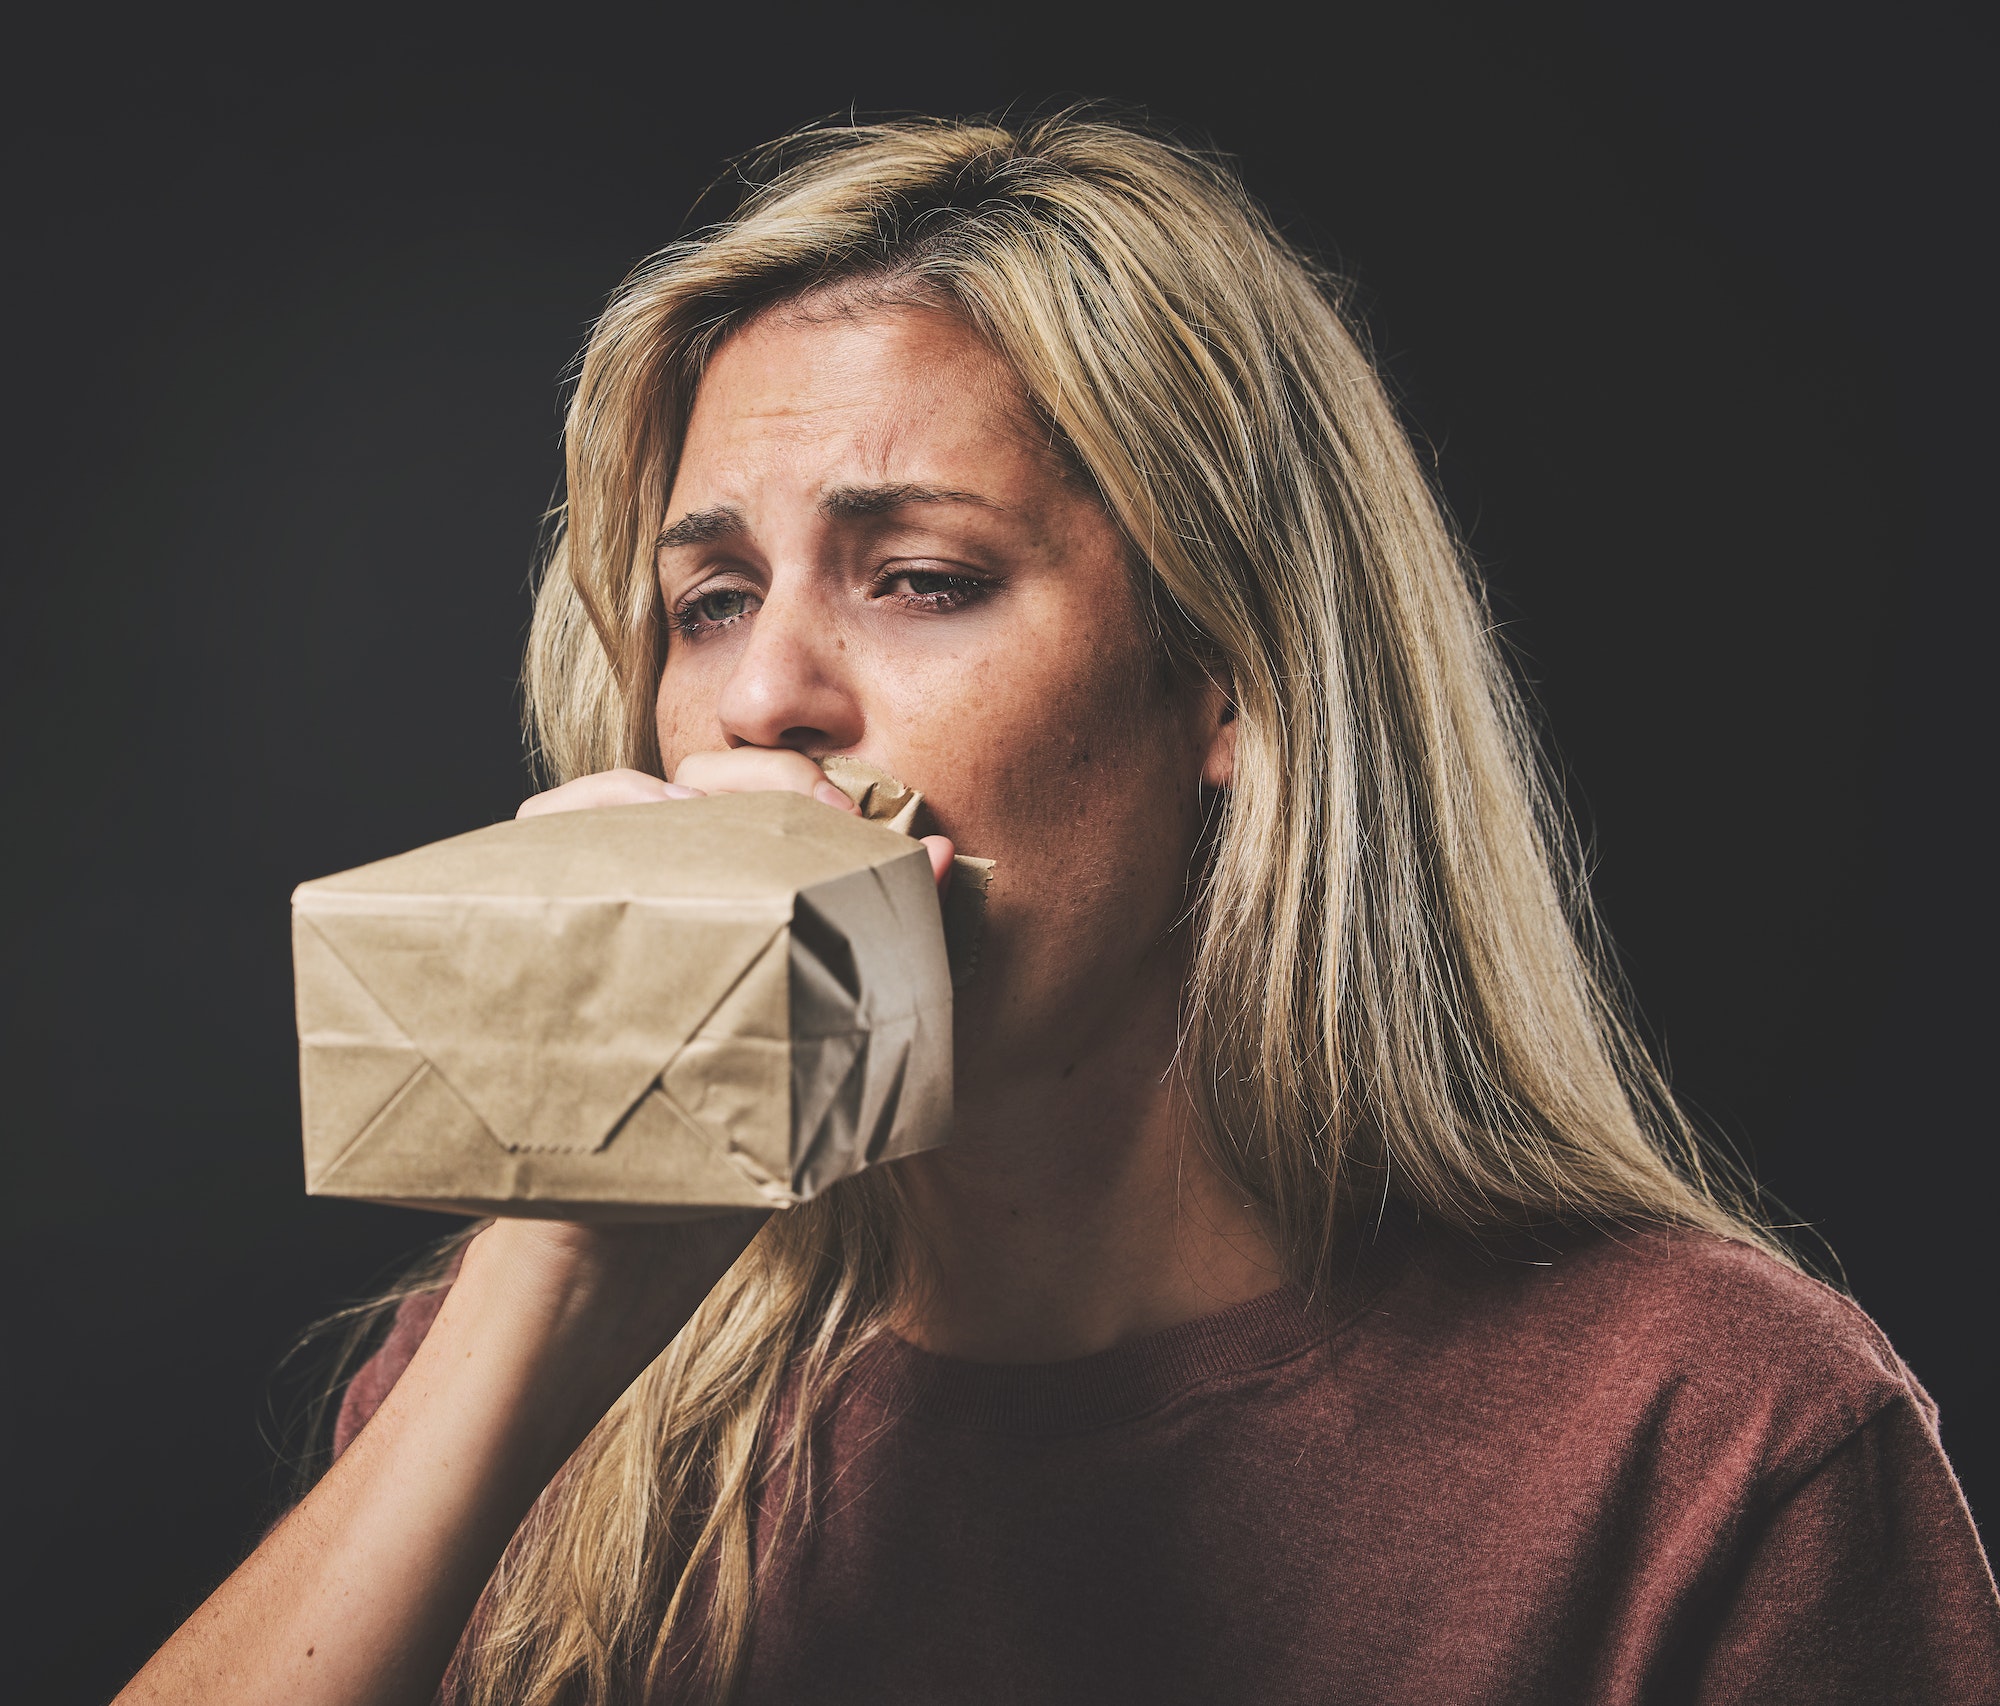 Anxiety, scared woman breathing into paper bag on dark background for mental health or psychology m